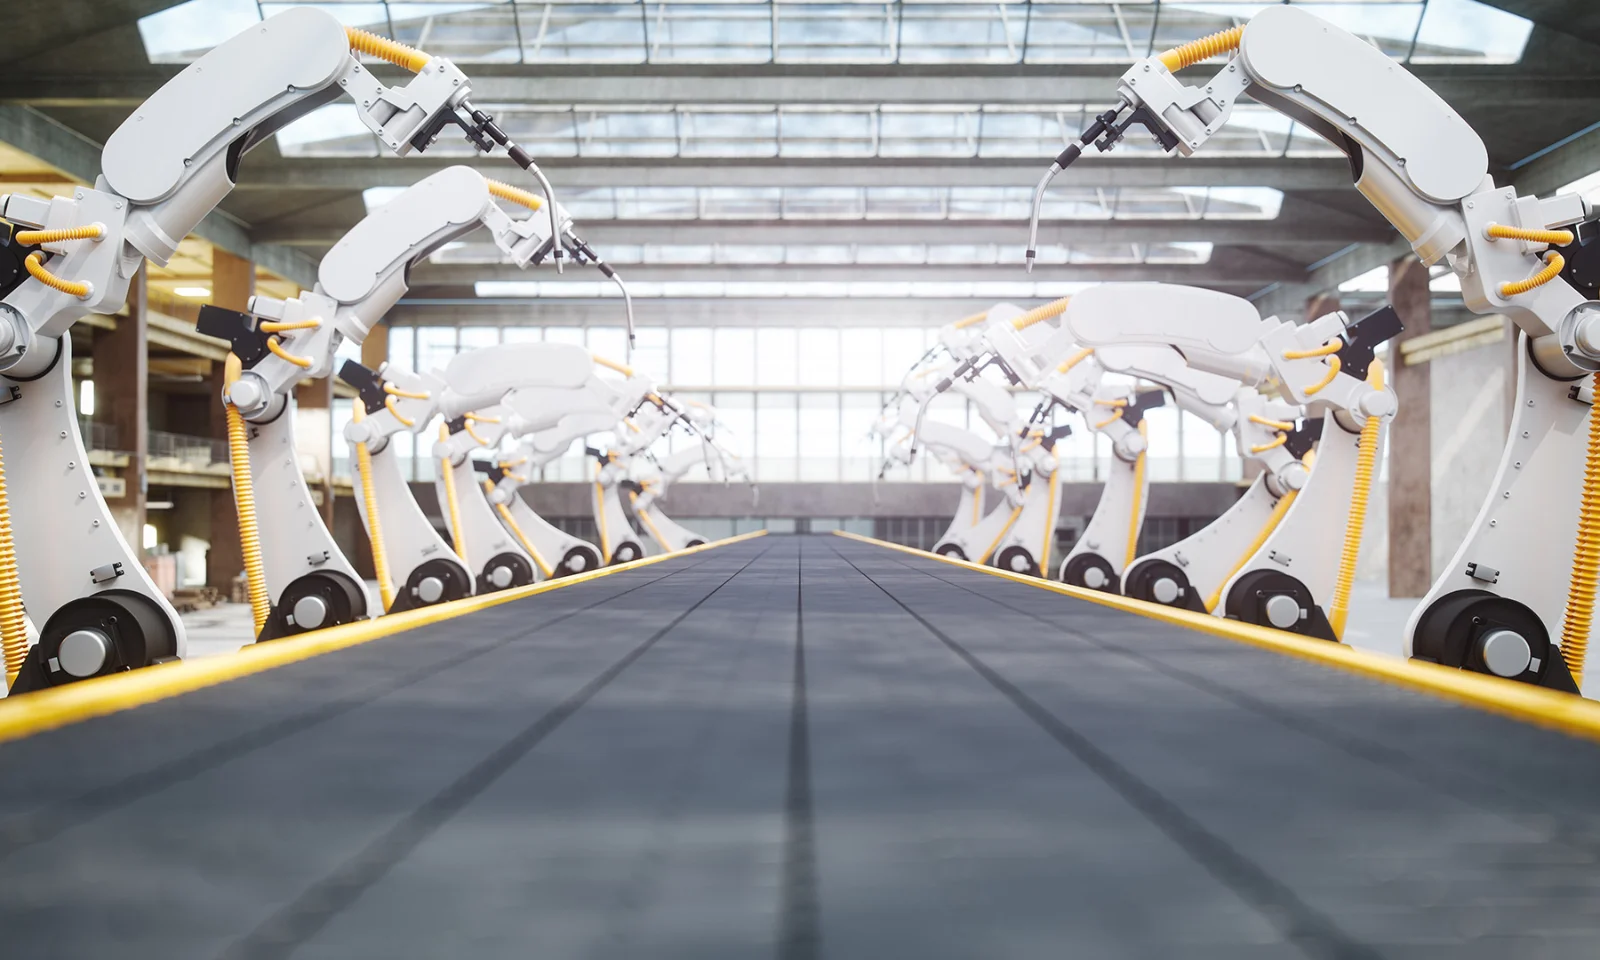 Discover the efficiency of automated assembly lines featuring advanced robotic arms, revolutionizing industrial production with precision and innovation in modern manufacturing.